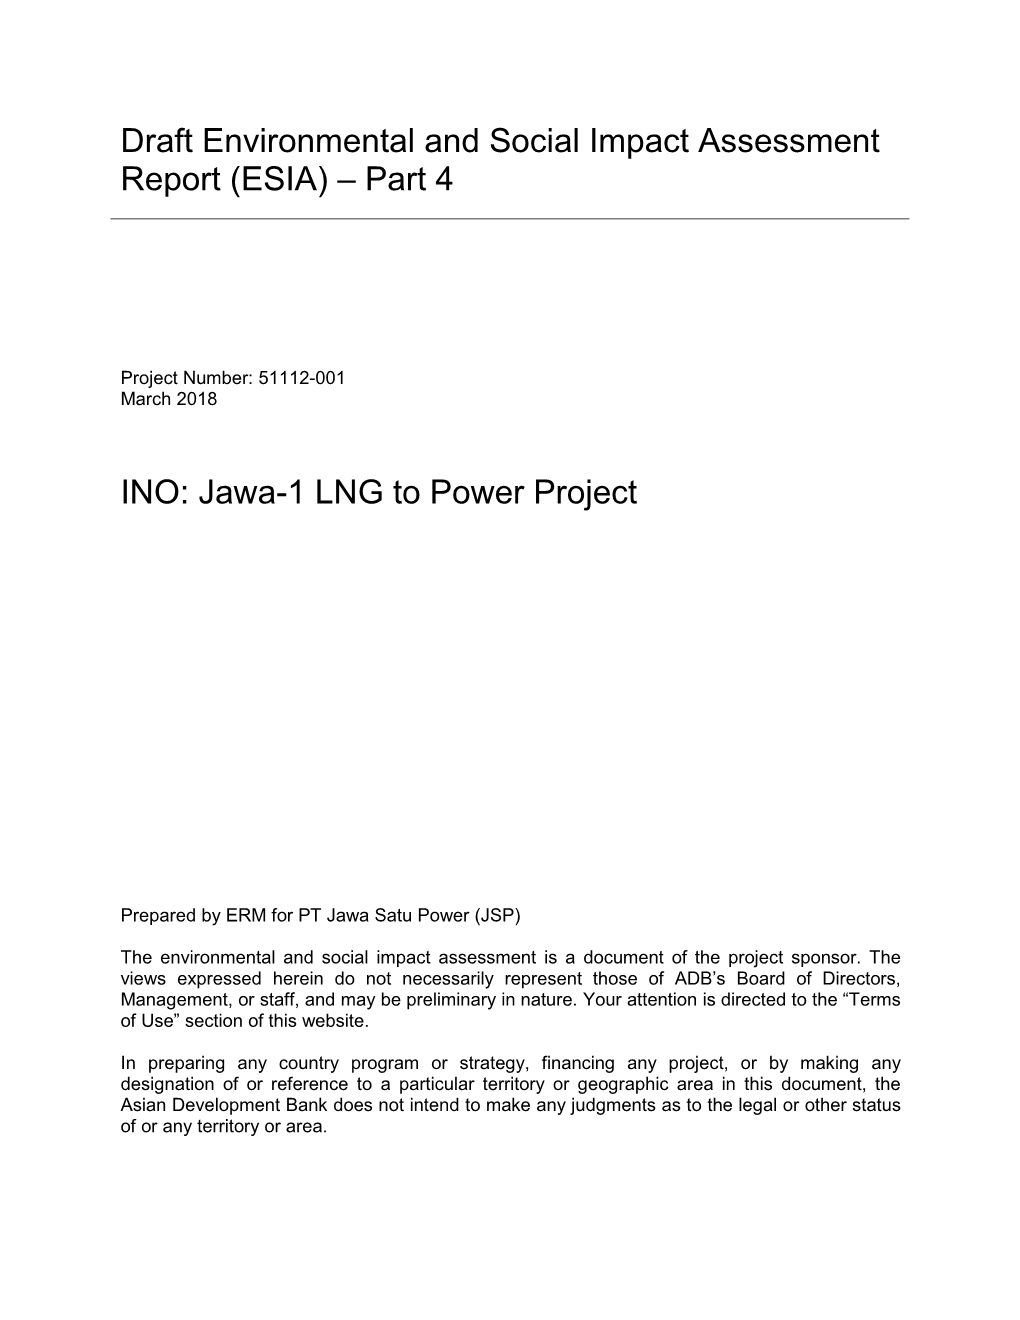 (ESIA) – Part 4 INO: Jawa-1 LNG to Power Project